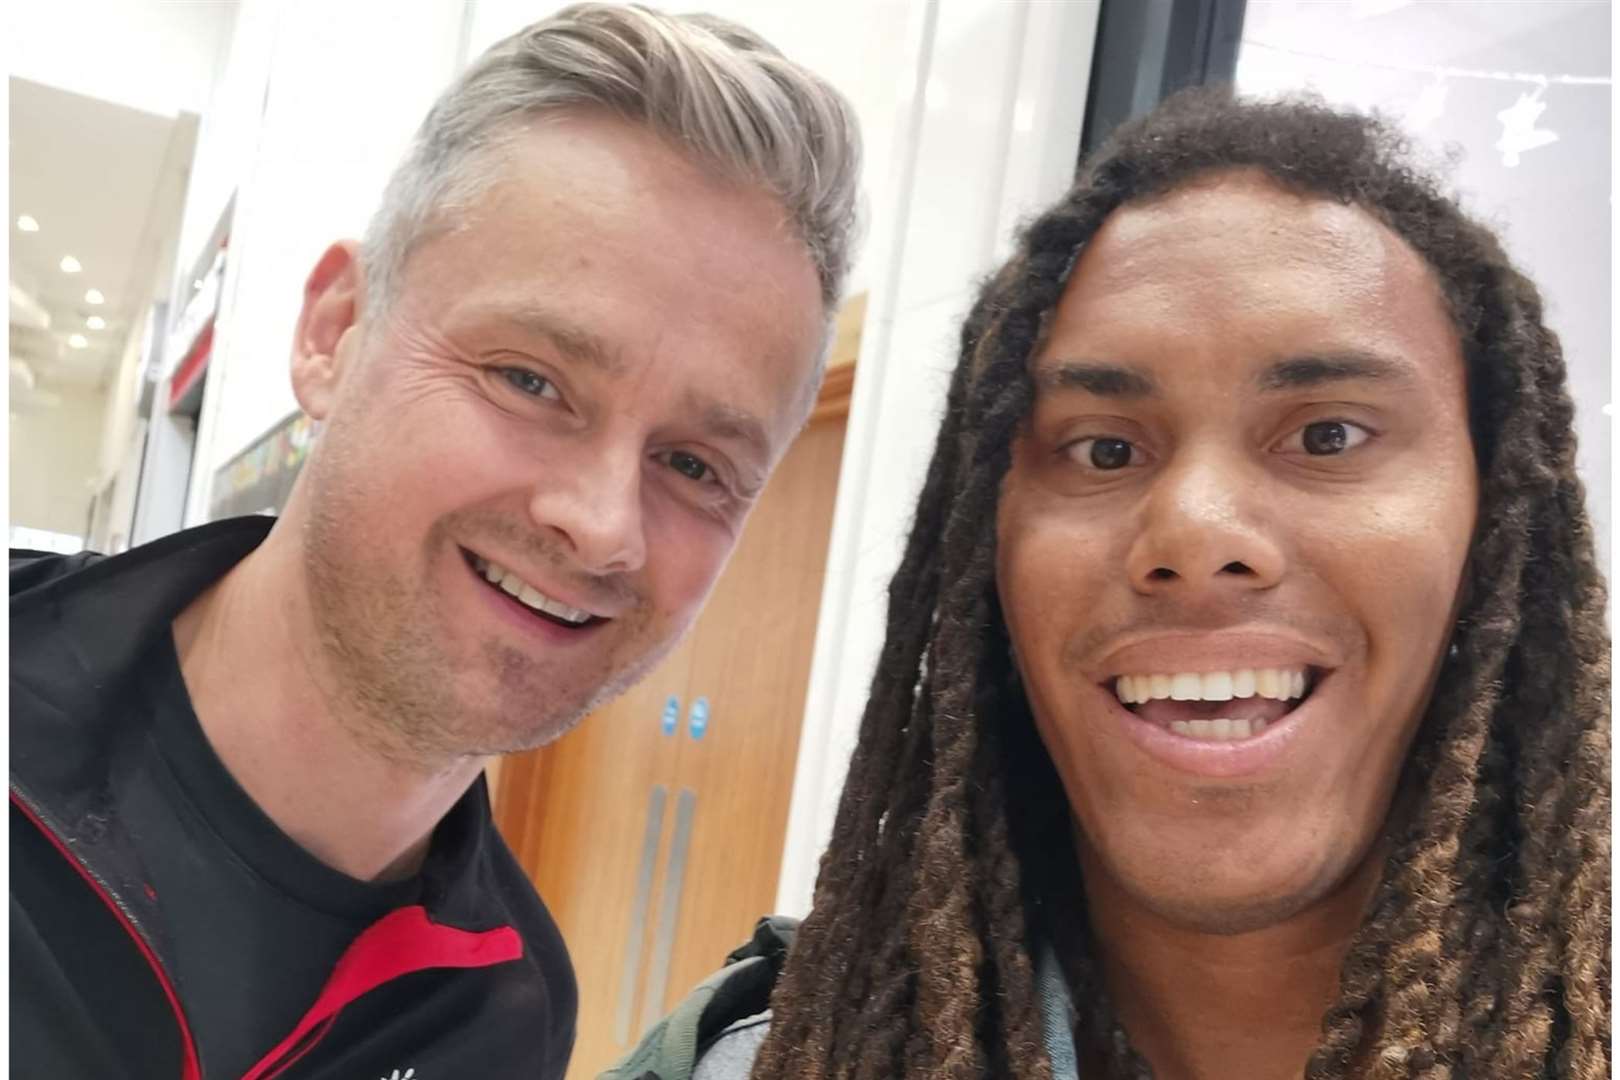 Tom Chapman stopped for a photo with fan Simeon Wright